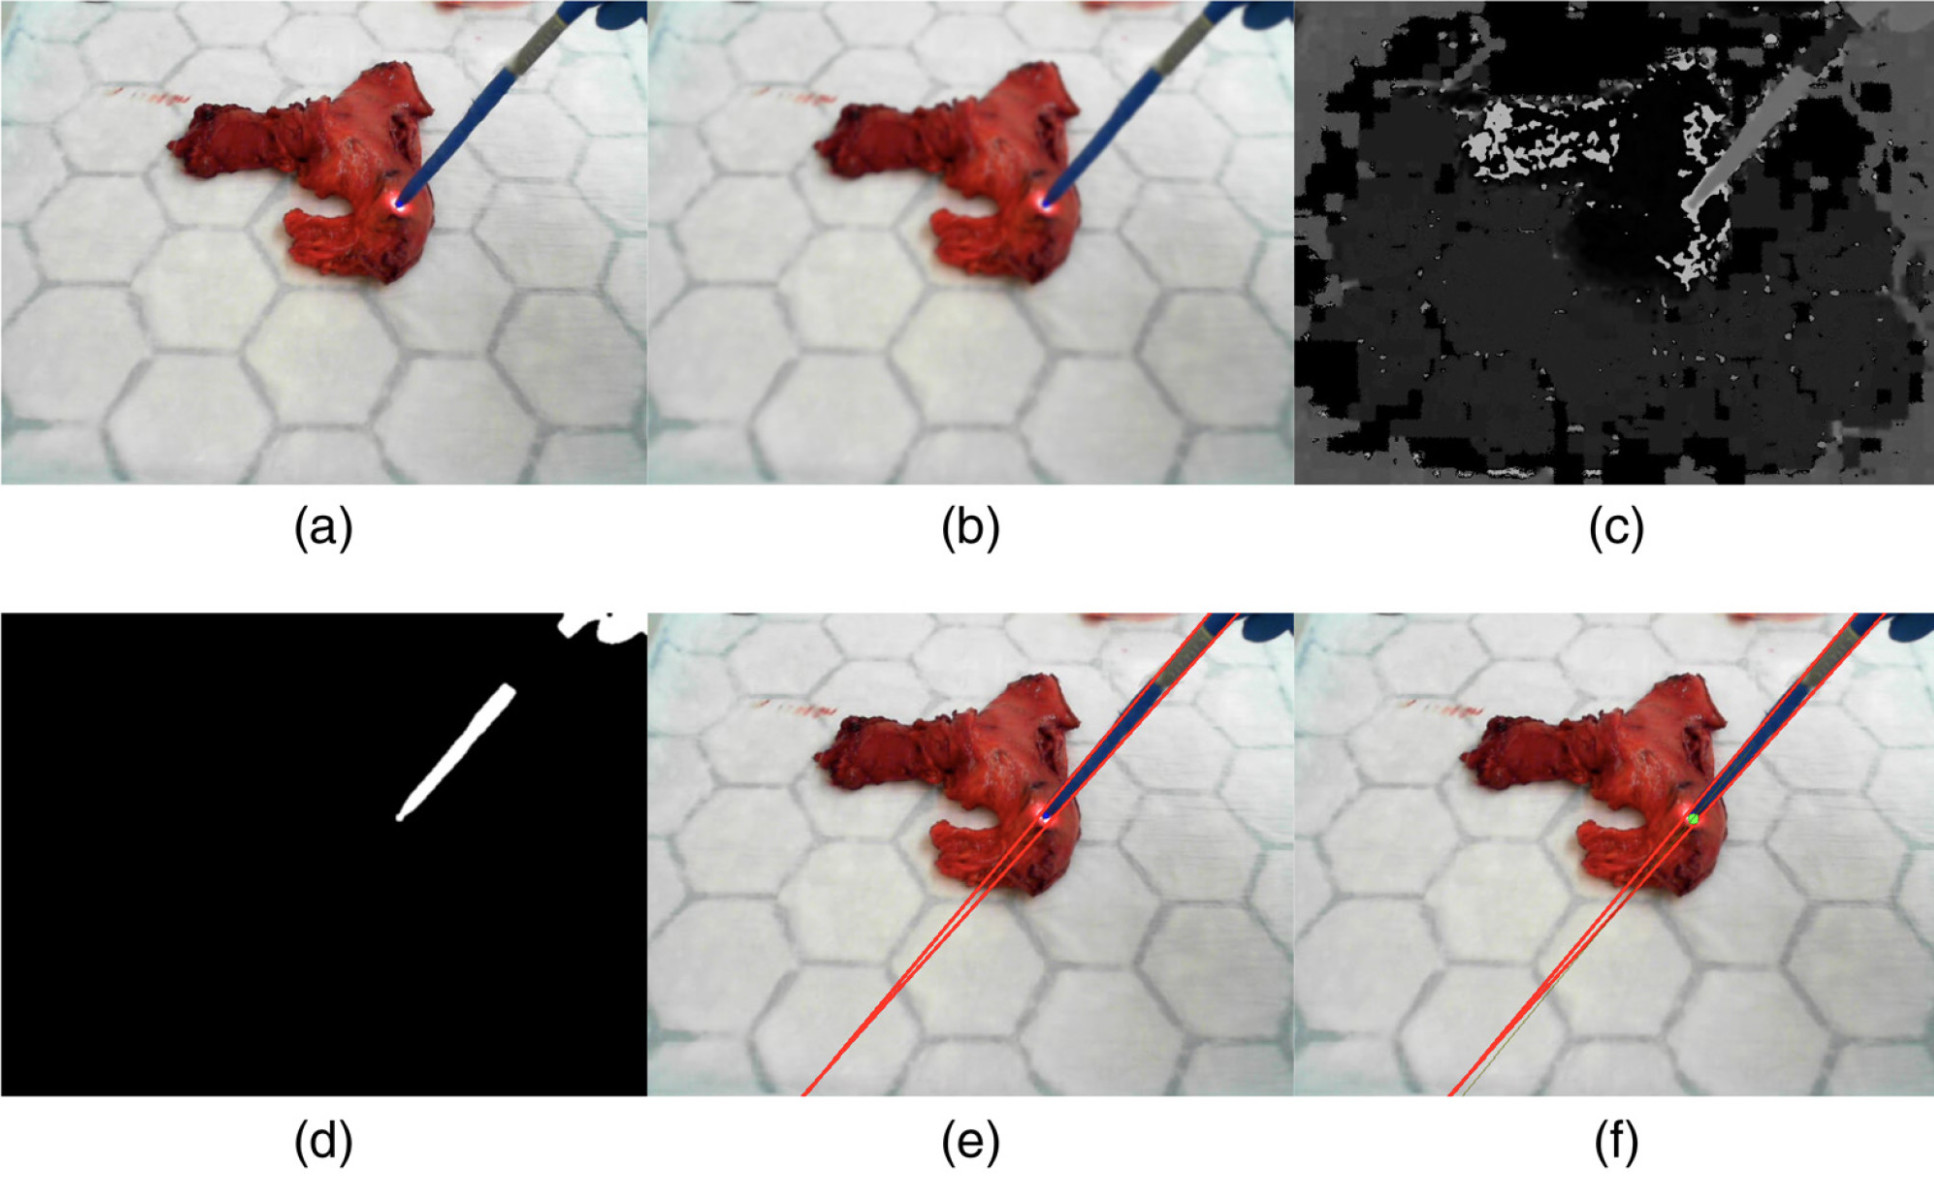 DRS probe detection workflow. (a) Example input video frame. (b) Blurred frame. (c) Hue channel of the blurred input frame. (d) Binary mask result of HSV segmentation. (e) Detected edge lines of the probe. (f) Detected tip point of the probe.